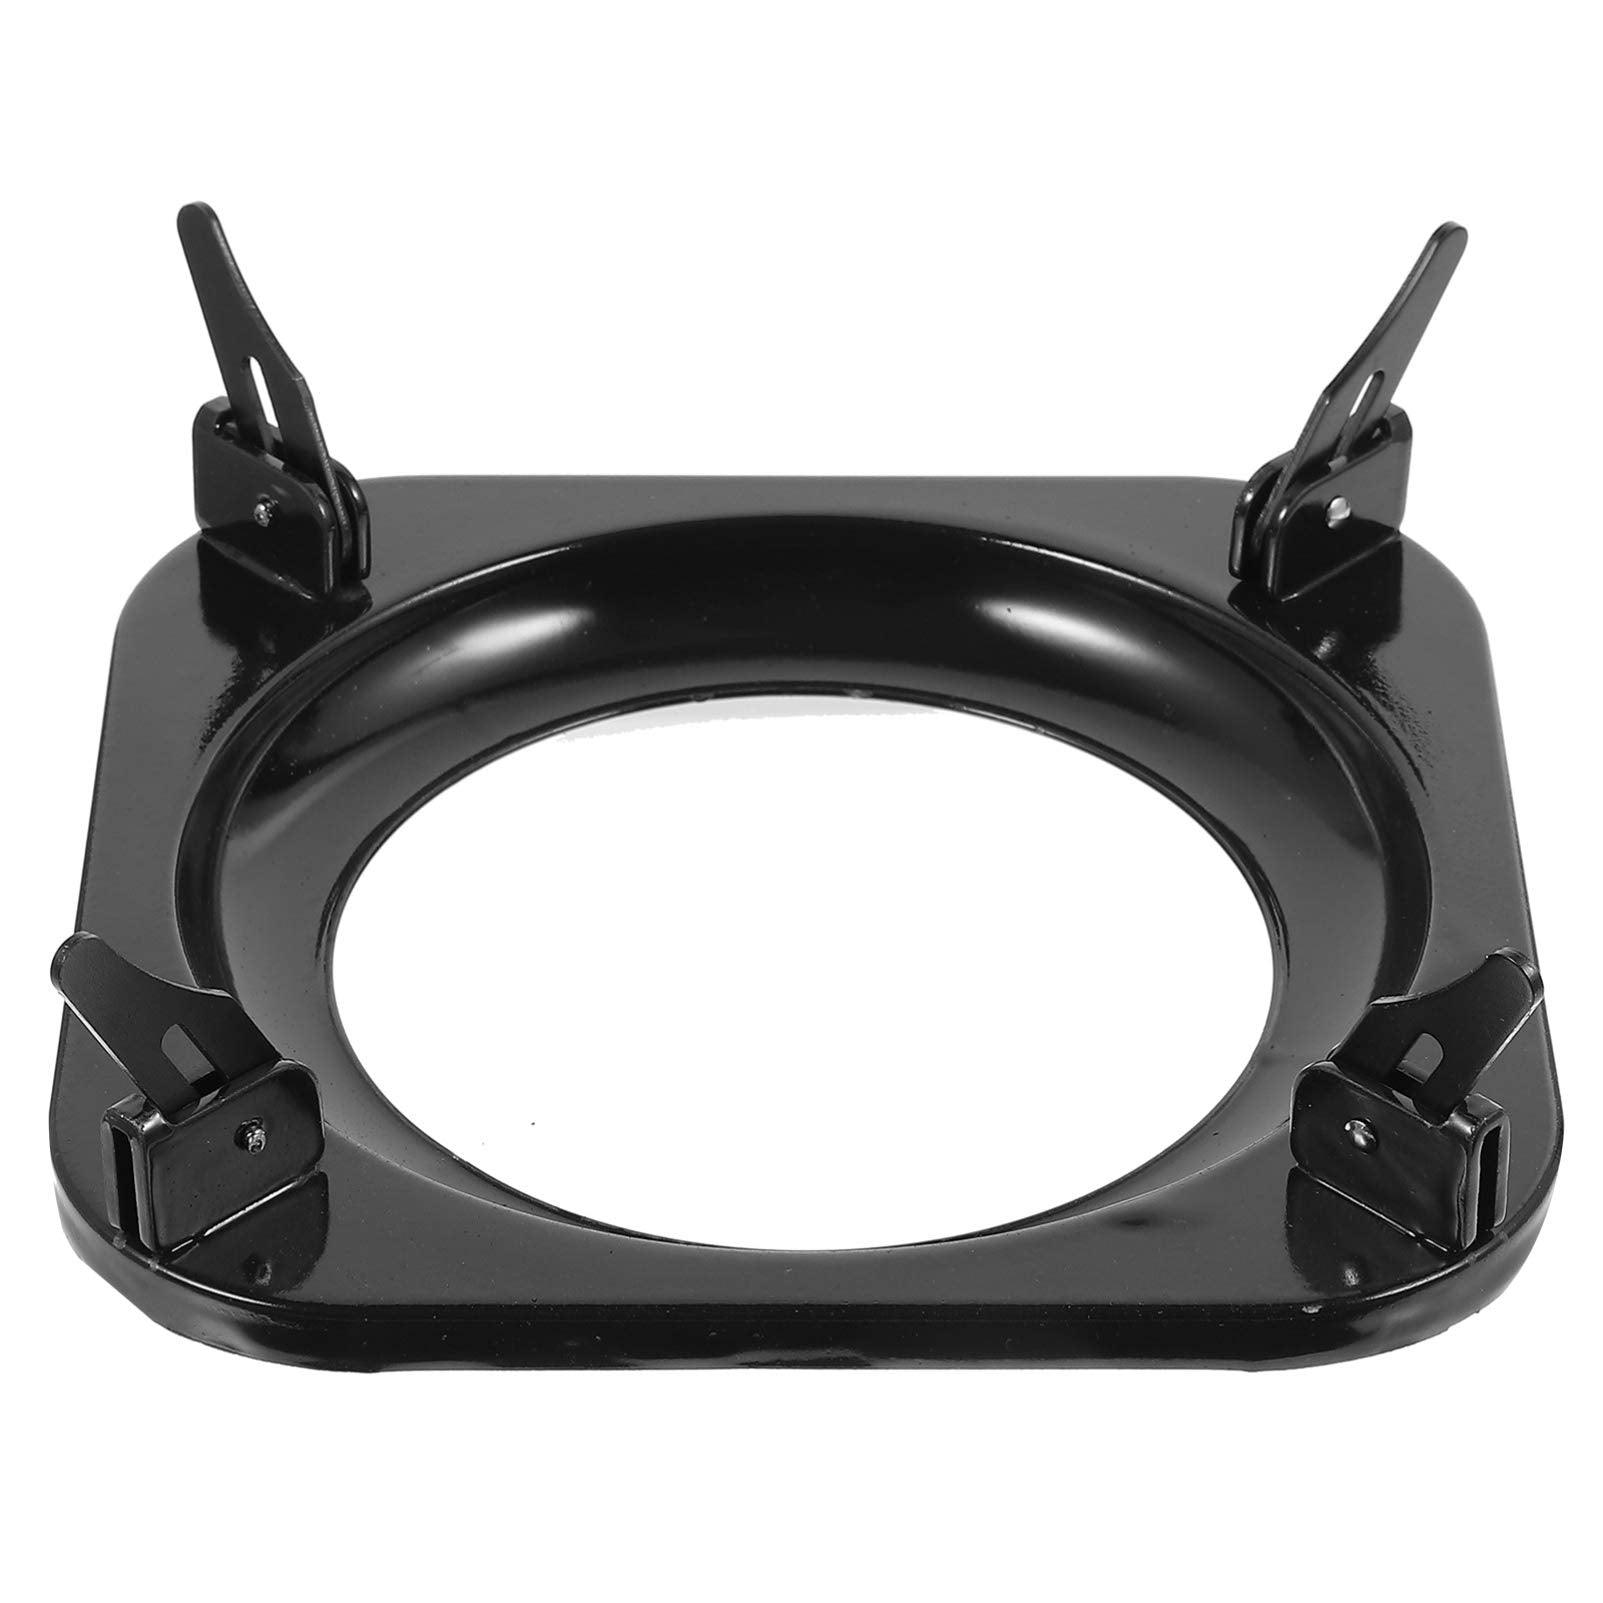 Cabilock Wok Support Ring Wok Ring Wok Rack Gas Stove Trivets Cooktop Range Pot Pan Support Ring Holder for Home Kitchen Wok Stand - CookCave